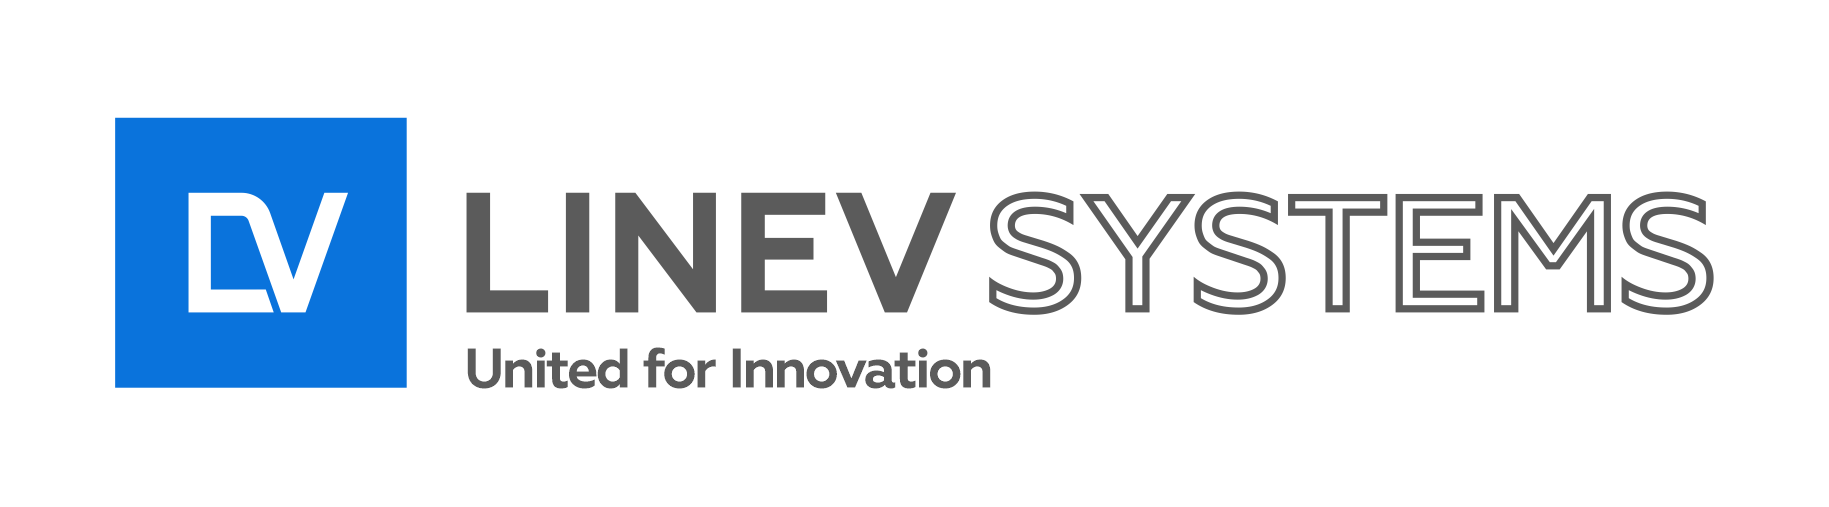 LINEV Systems US